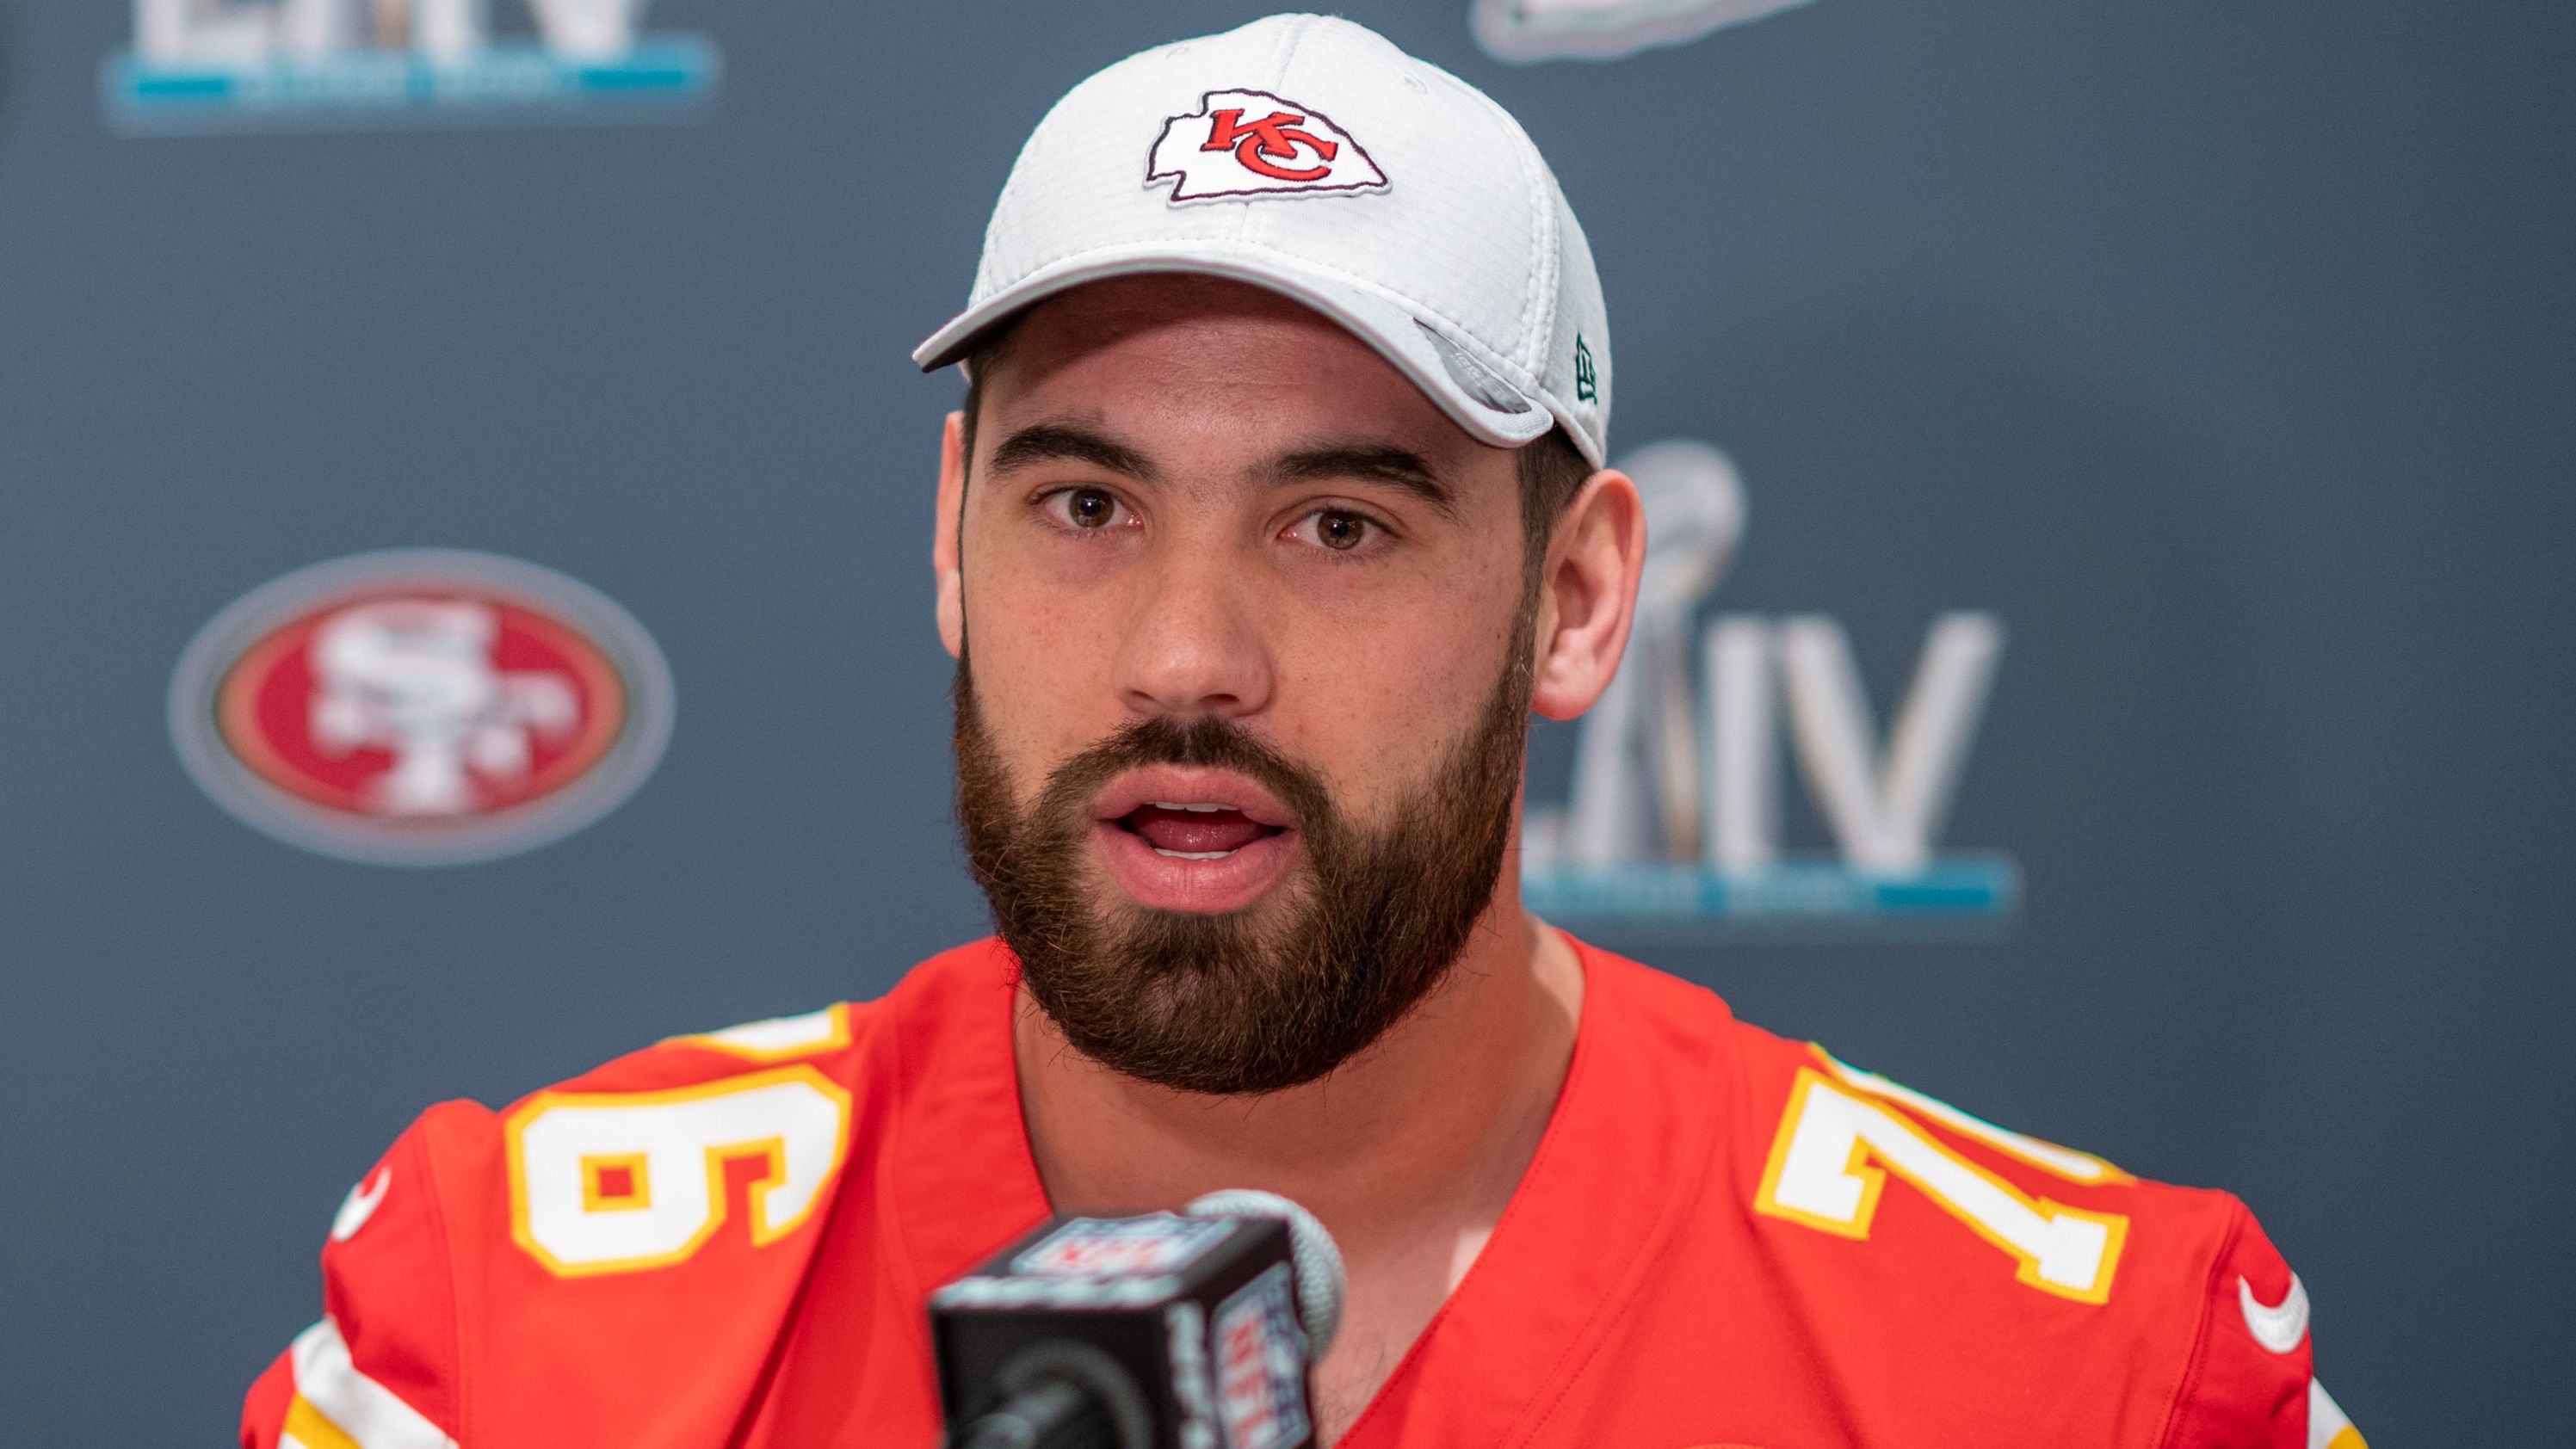 Kansas City Chiefs Offensive Guard Laurent Duvernay-Tardif earned his doctor of medicine degree in 2018.